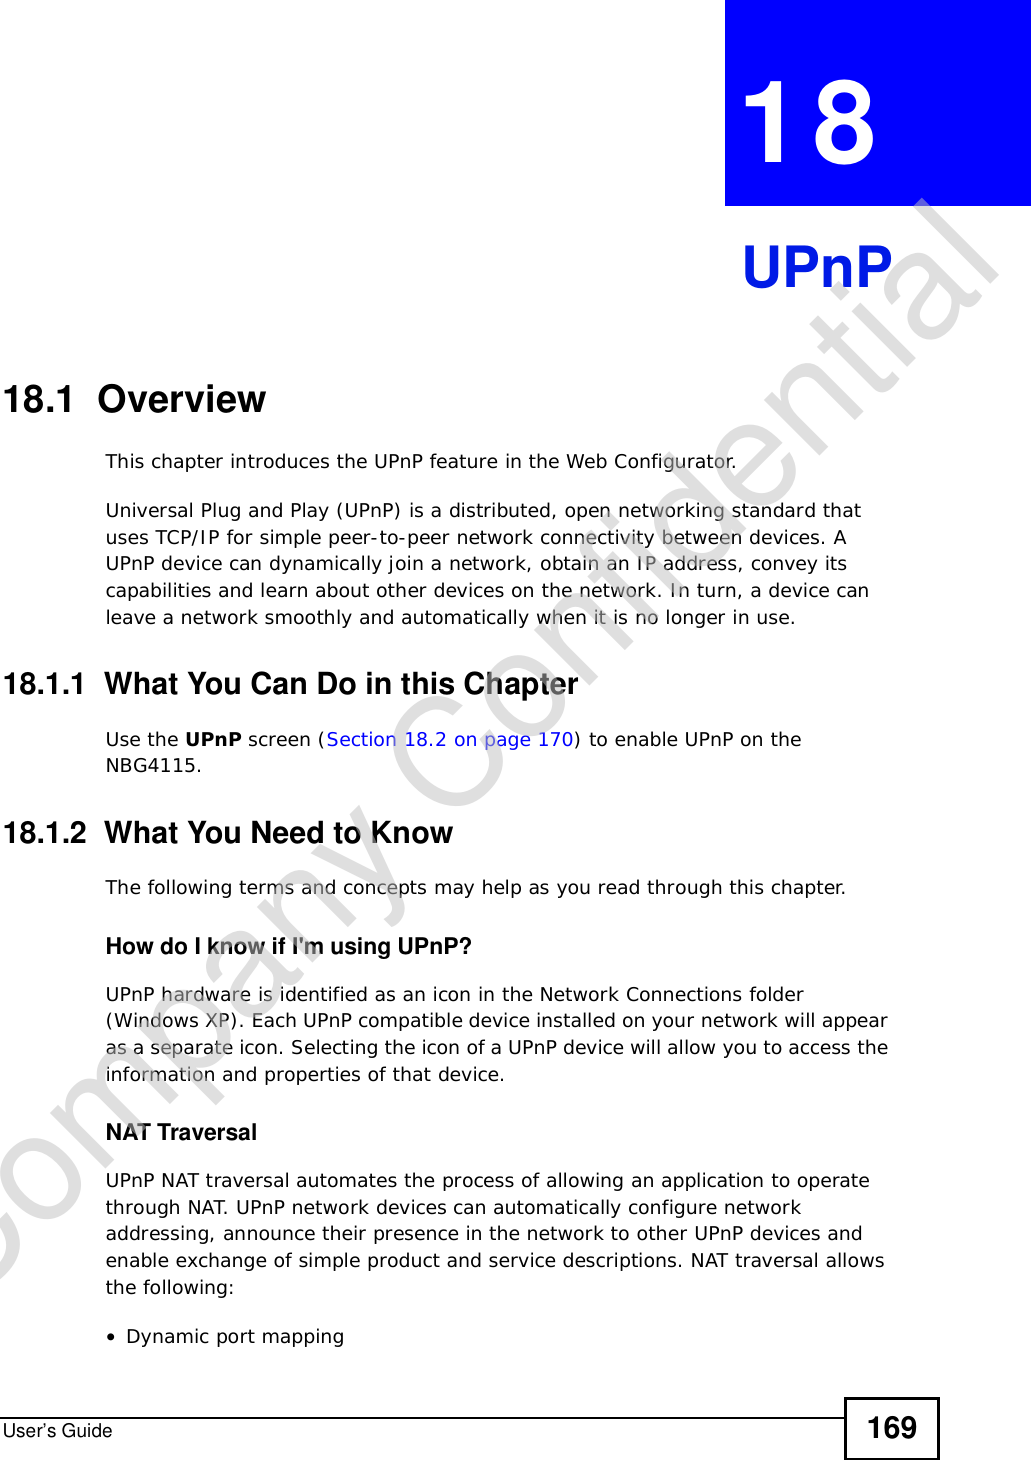 User’s Guide 169CHAPTER 18UPnP18.1  Overview This chapter introduces the UPnP feature in the Web Configurator.Universal Plug and Play (UPnP) is a distributed, open networking standard that uses TCP/IP for simple peer-to-peer network connectivity between devices. A UPnP device can dynamically join a network, obtain an IP address, convey its capabilities and learn about other devices on the network. In turn, a device can leave a network smoothly and automatically when it is no longer in use.18.1.1  What You Can Do in this ChapterUse the UPnP screen (Section 18.2 on page 170) to enable UPnP on the NBG4115.18.1.2  What You Need to KnowThe following terms and concepts may help as you read through this chapter.How do I know if I&apos;m using UPnP? UPnP hardware is identified as an icon in the Network Connections folder (Windows XP). Each UPnP compatible device installed on your network will appear as a separate icon. Selecting the icon of a UPnP device will allow you to access the information and properties of that device. NAT TraversalUPnP NAT traversal automates the process of allowing an application to operate through NAT. UPnP network devices can automatically configure network addressing, announce their presence in the network to other UPnP devices and enable exchange of simple product and service descriptions. NAT traversal allows the following:•Dynamic port mappingCompany Confidential